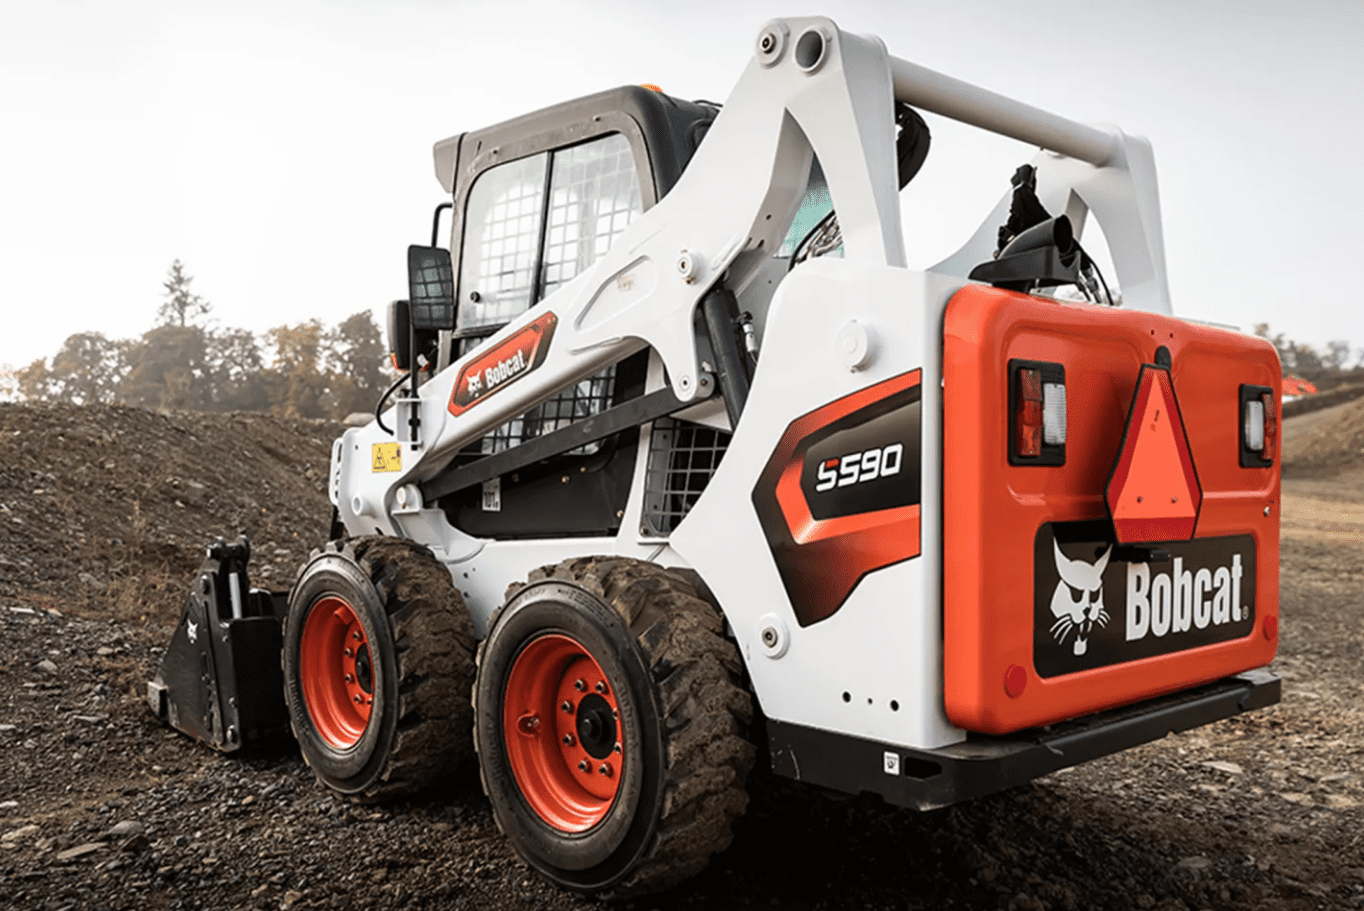 Browse Specs and more for the S590 Skid-Steer Loader - Bobcat of Atlanta